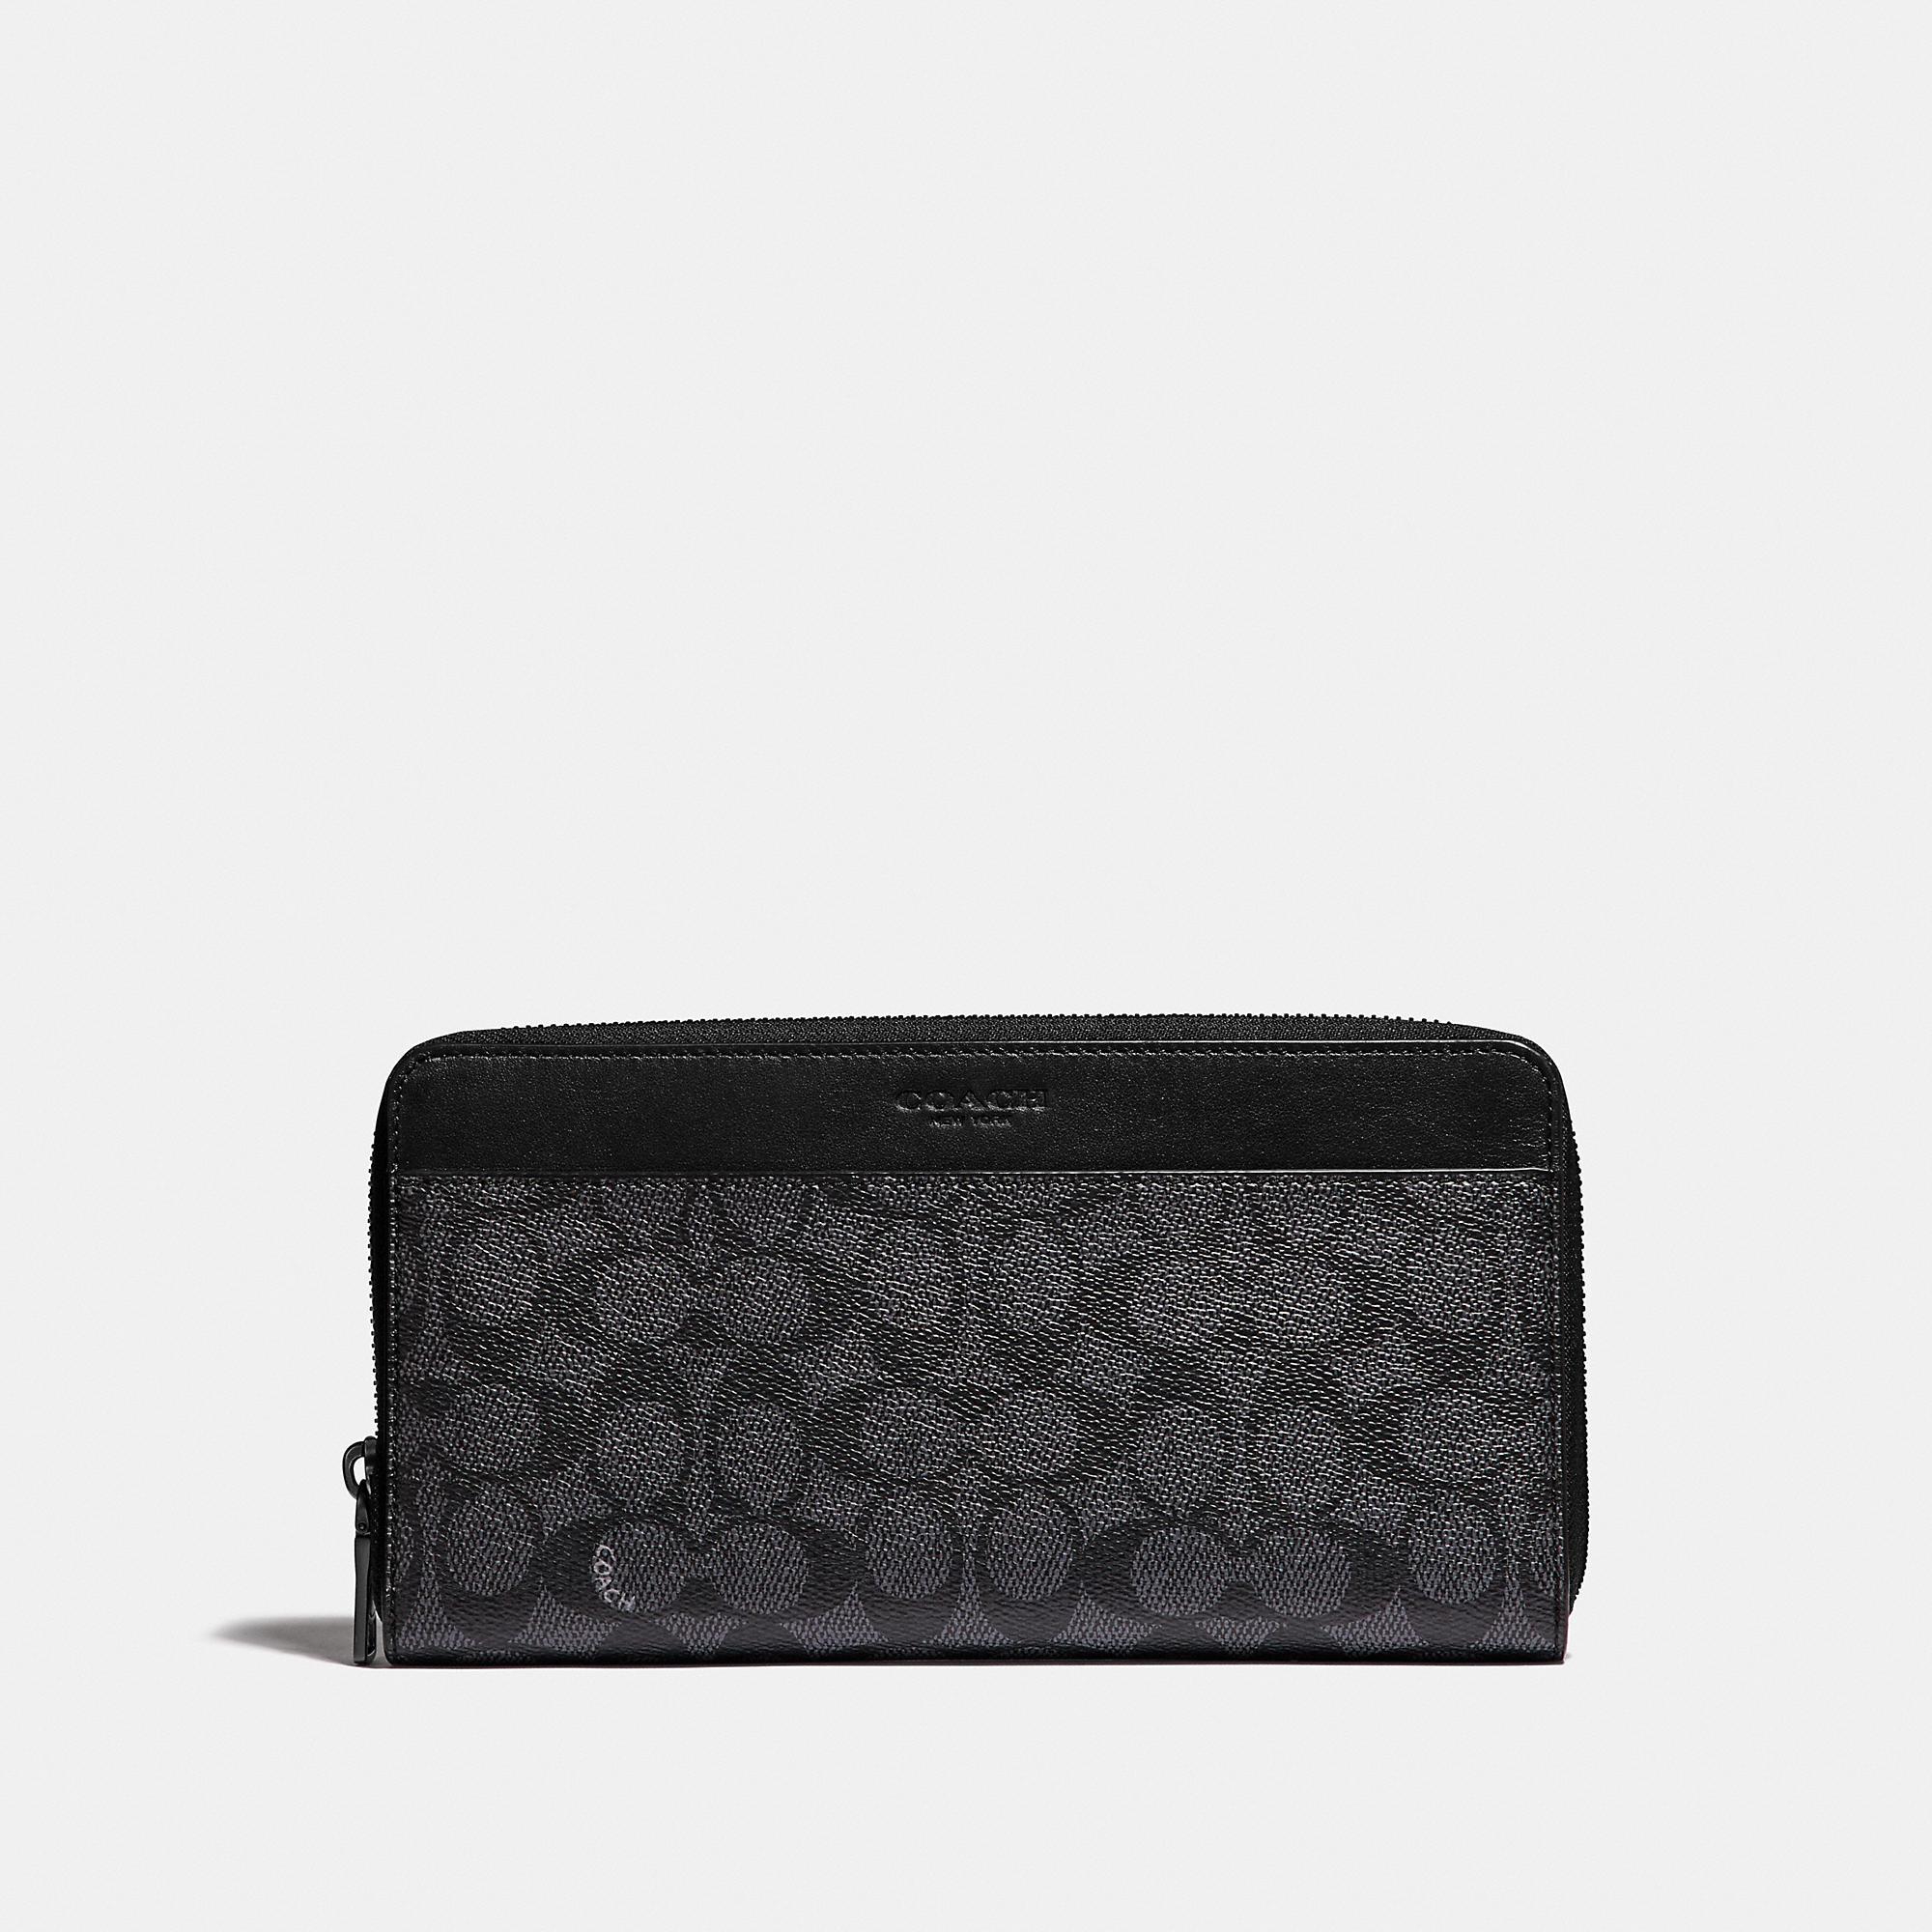 COACH Travel Wallet In Signature Canvas in Black for Men - Lyst